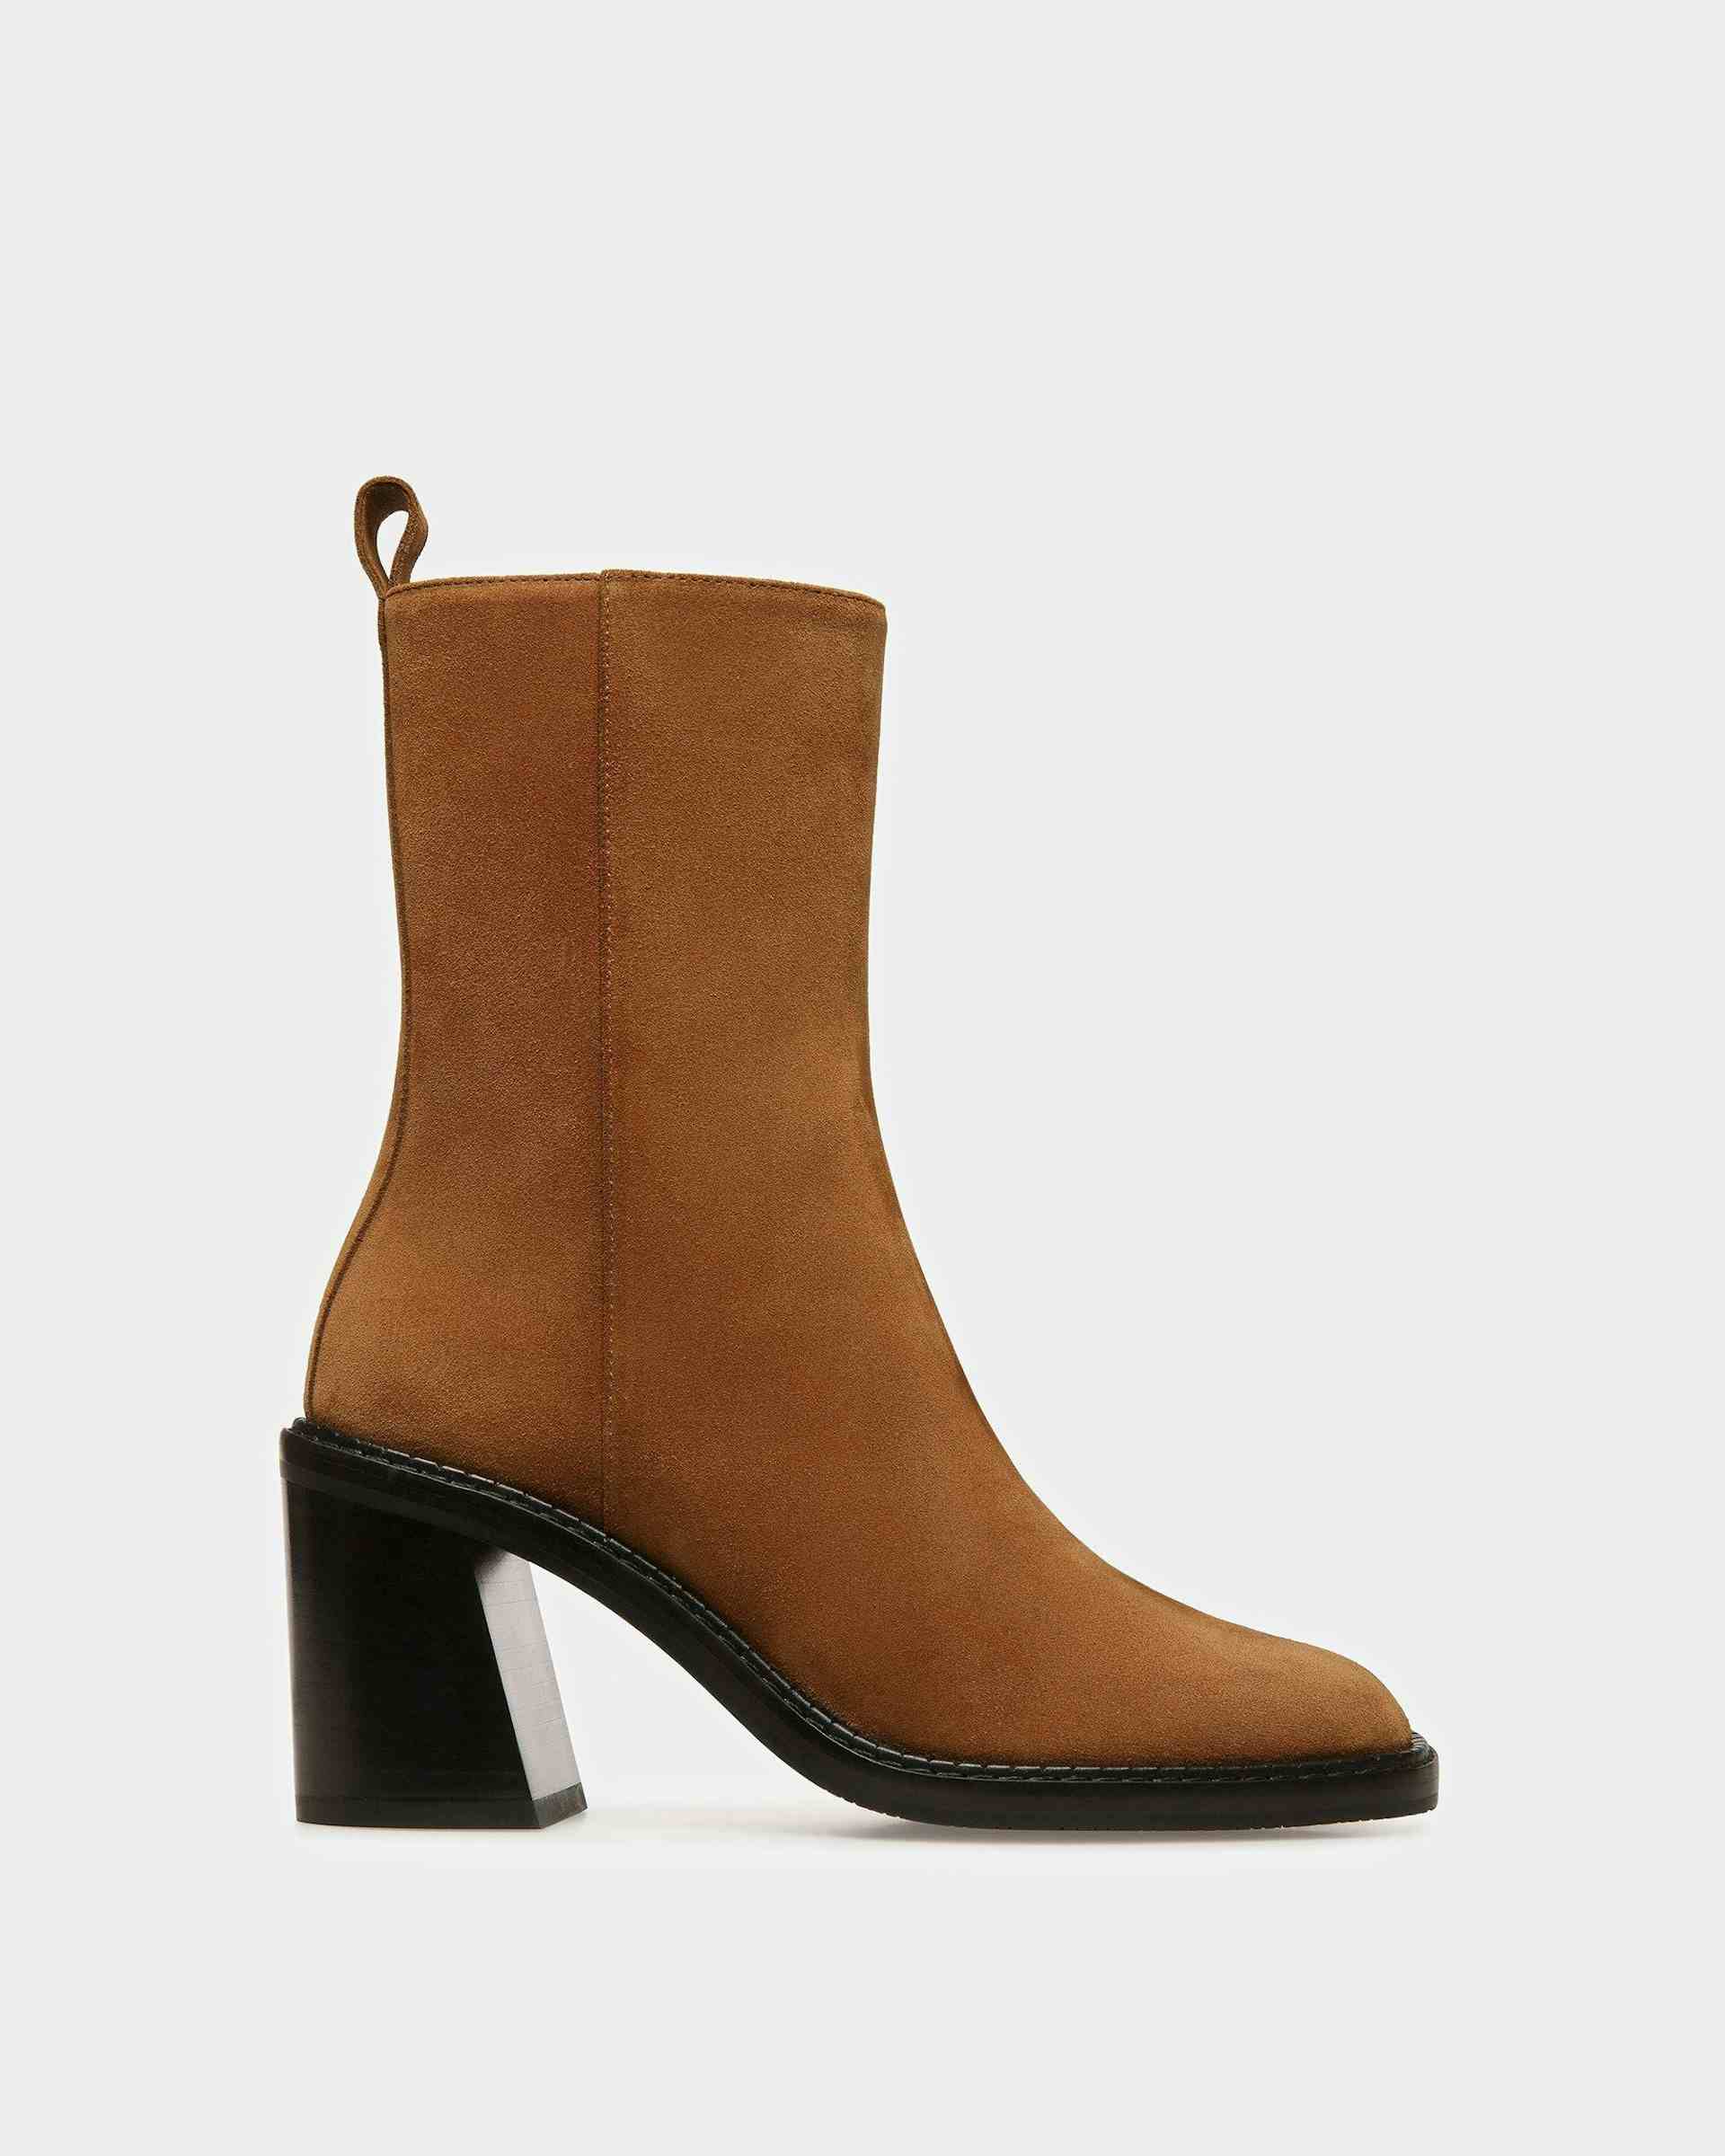 Austine Leather Boots In Brown - Women's - Bally